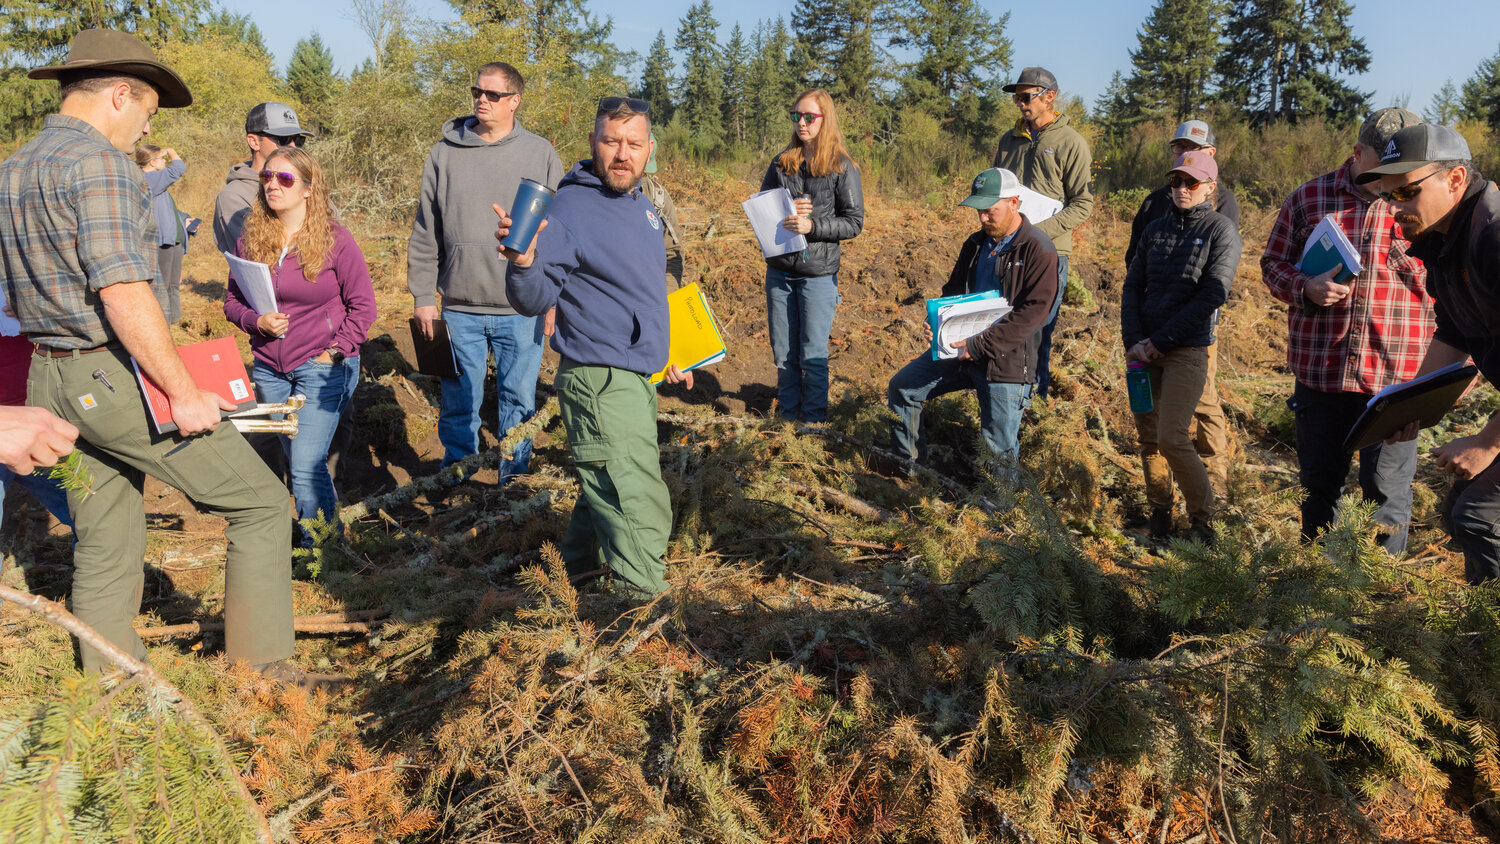 Certified Burner Program Manager Kyle Lapham, with the Department of Natural Resources, leads a training on prescribed burning at West Rocky Prairie near Tenino on Thursday, Sept. 21.